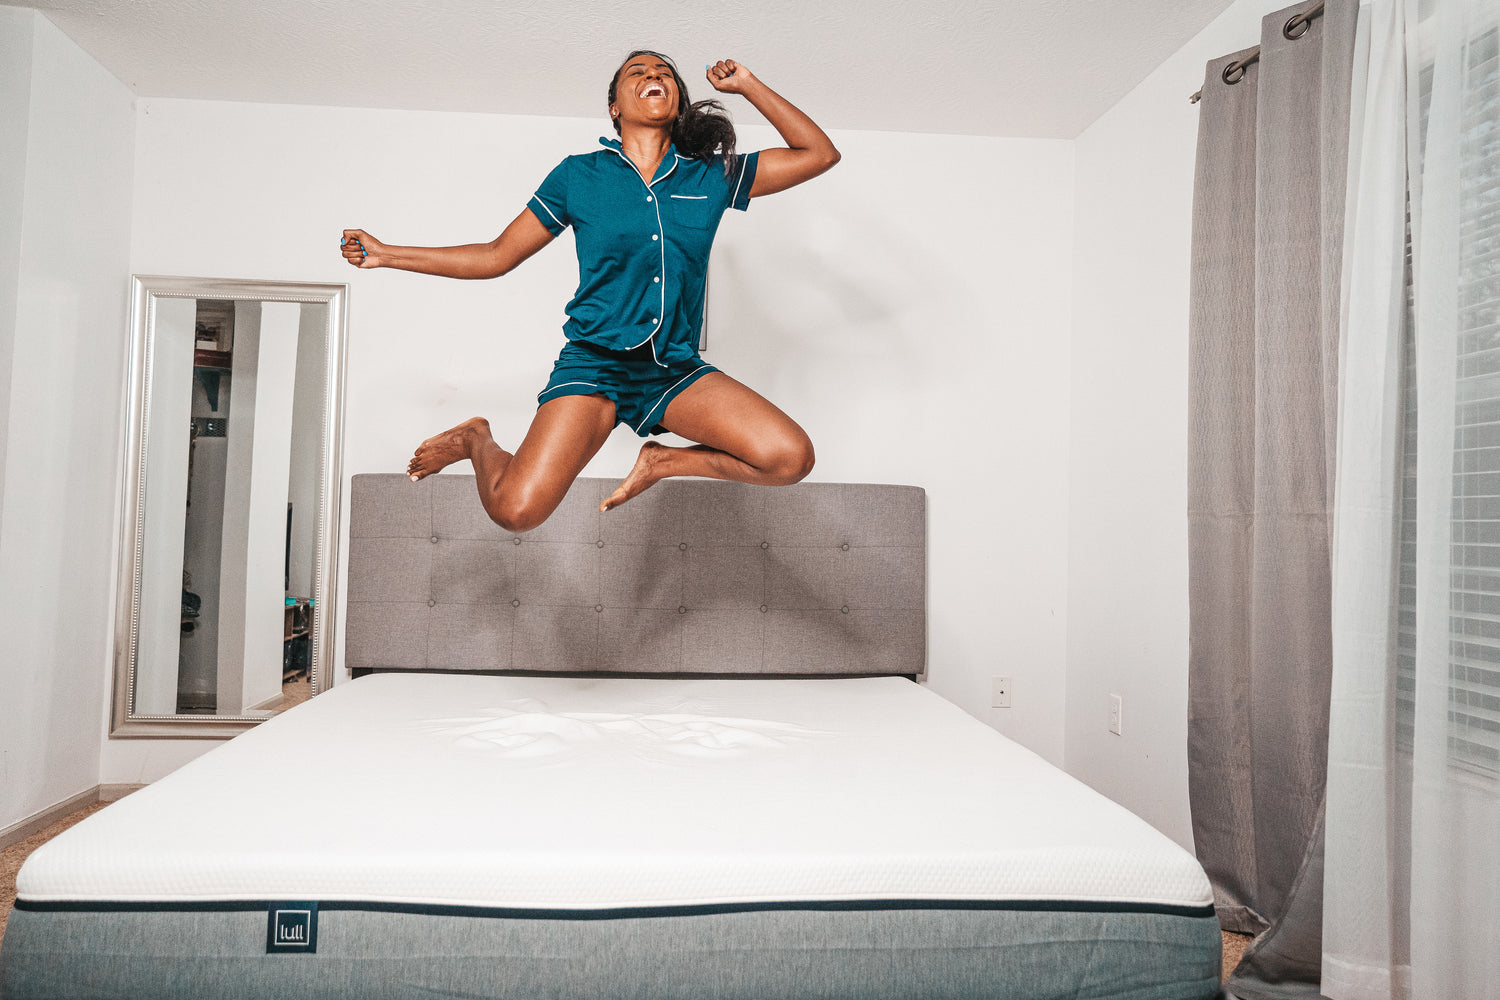 A girl smiling on her lull mattress and jumping high in the air.